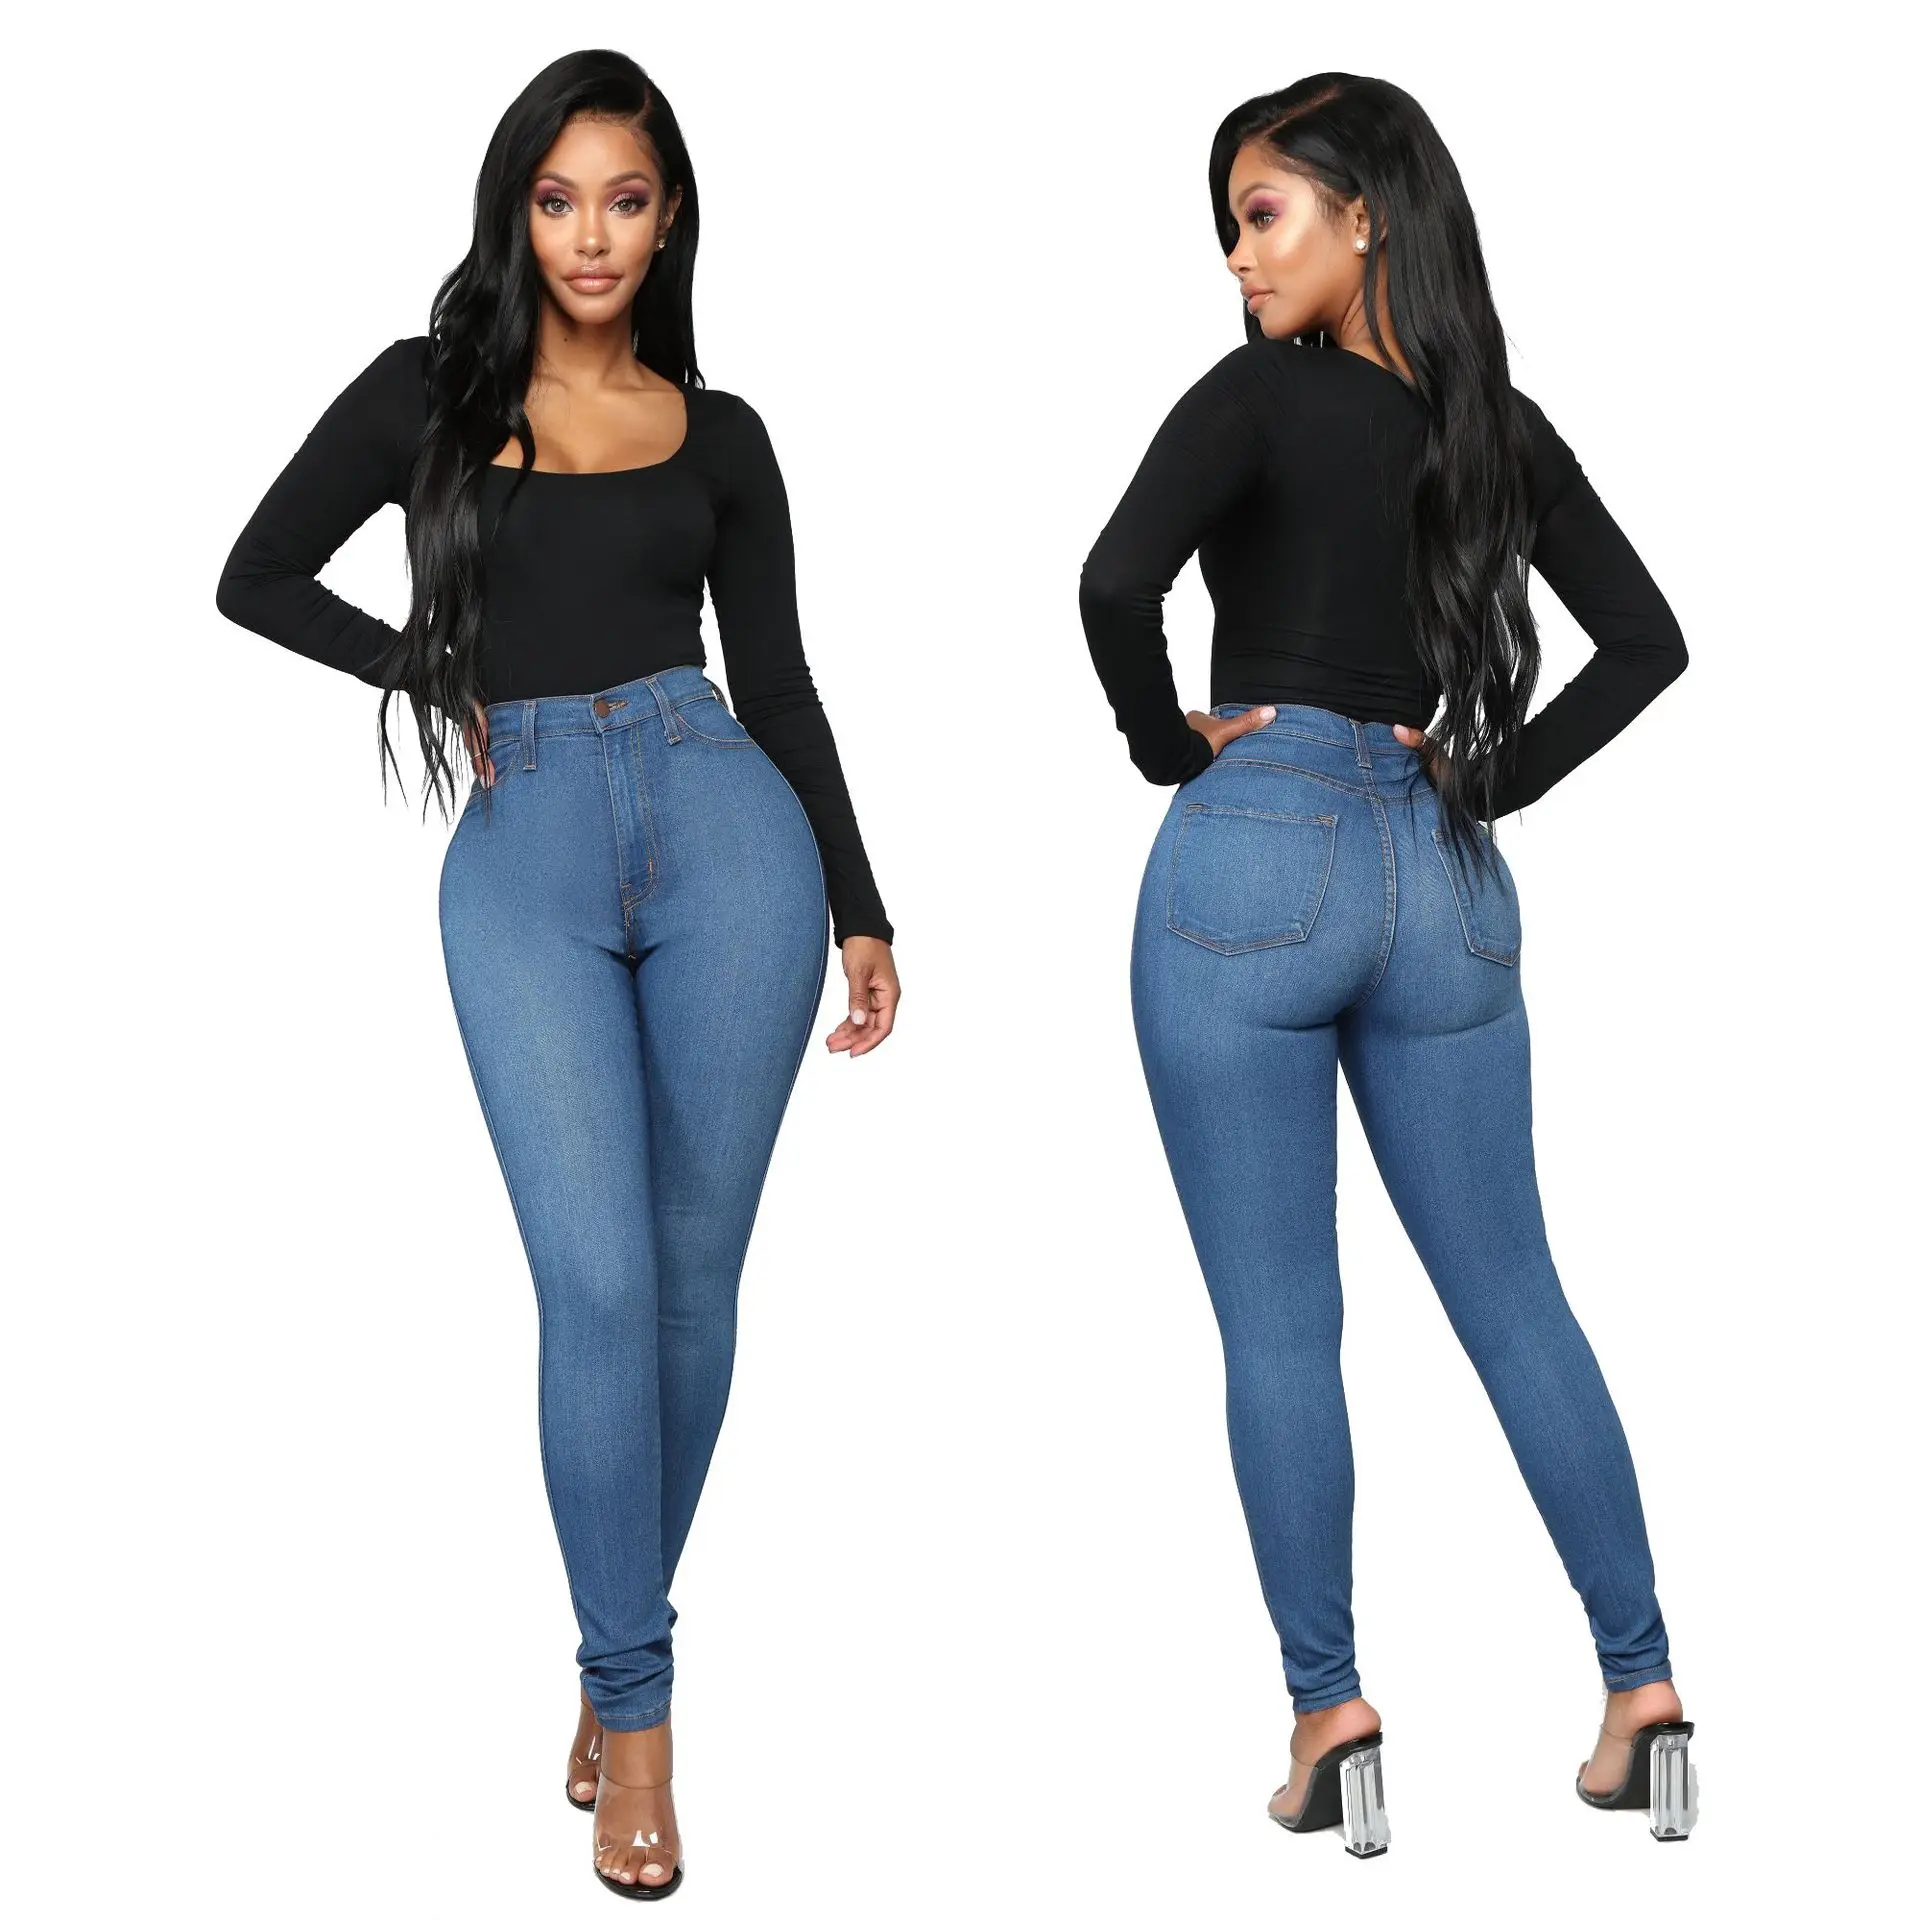 Cheapest Product Fashion Fall Autumn Ladies Jeans Sexy Pants for Women Jean  Pants  China Women Jeans Pants and Fur Jean Jacket Women price   MadeinChinacom